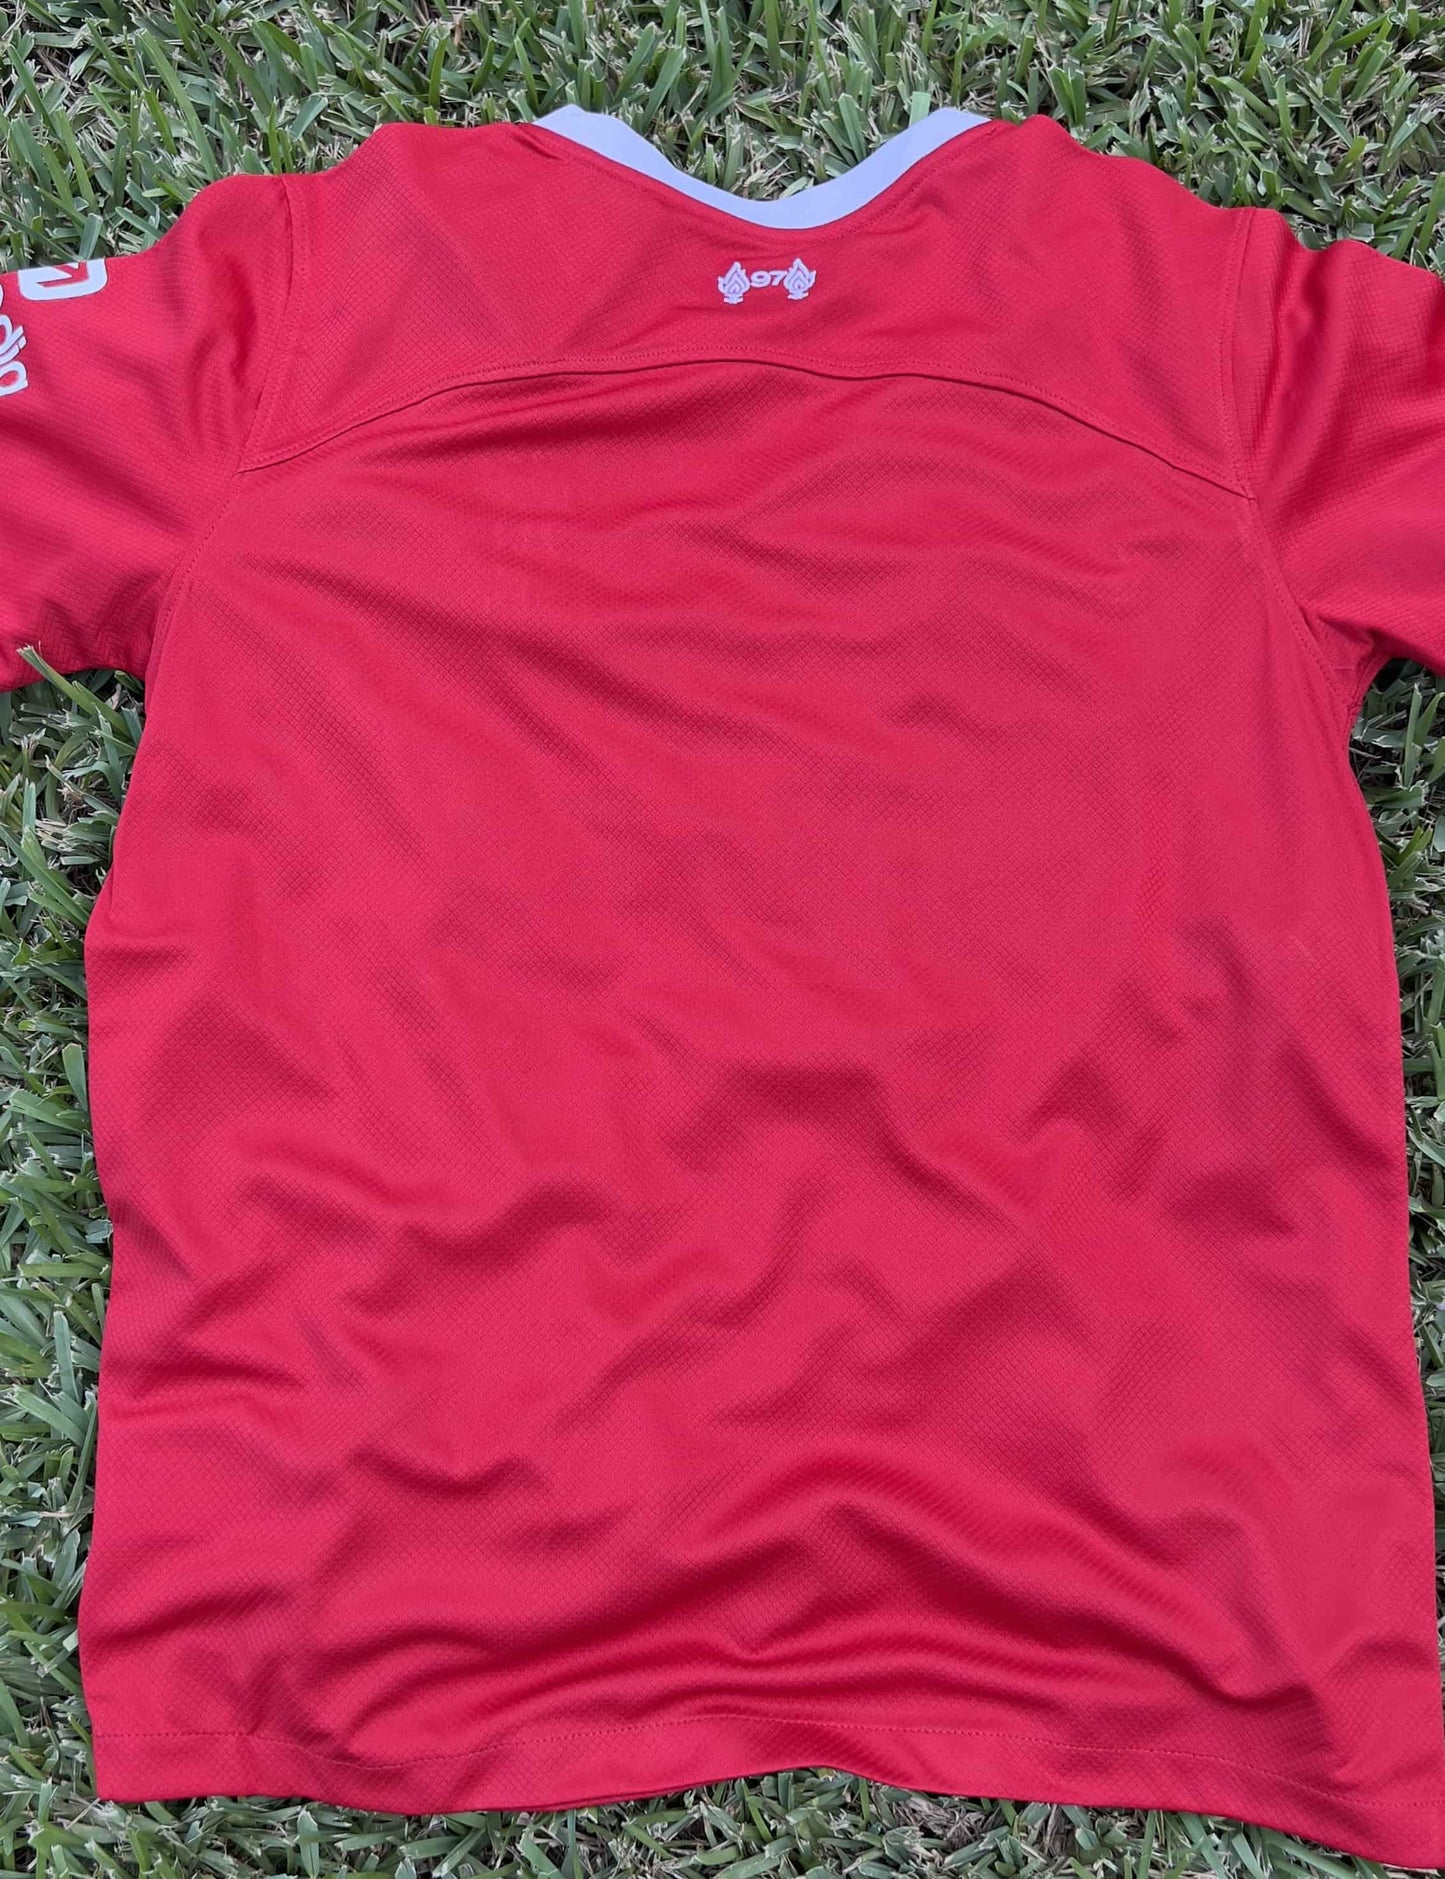 Liverpool Home Soccer Jersey Adult Size